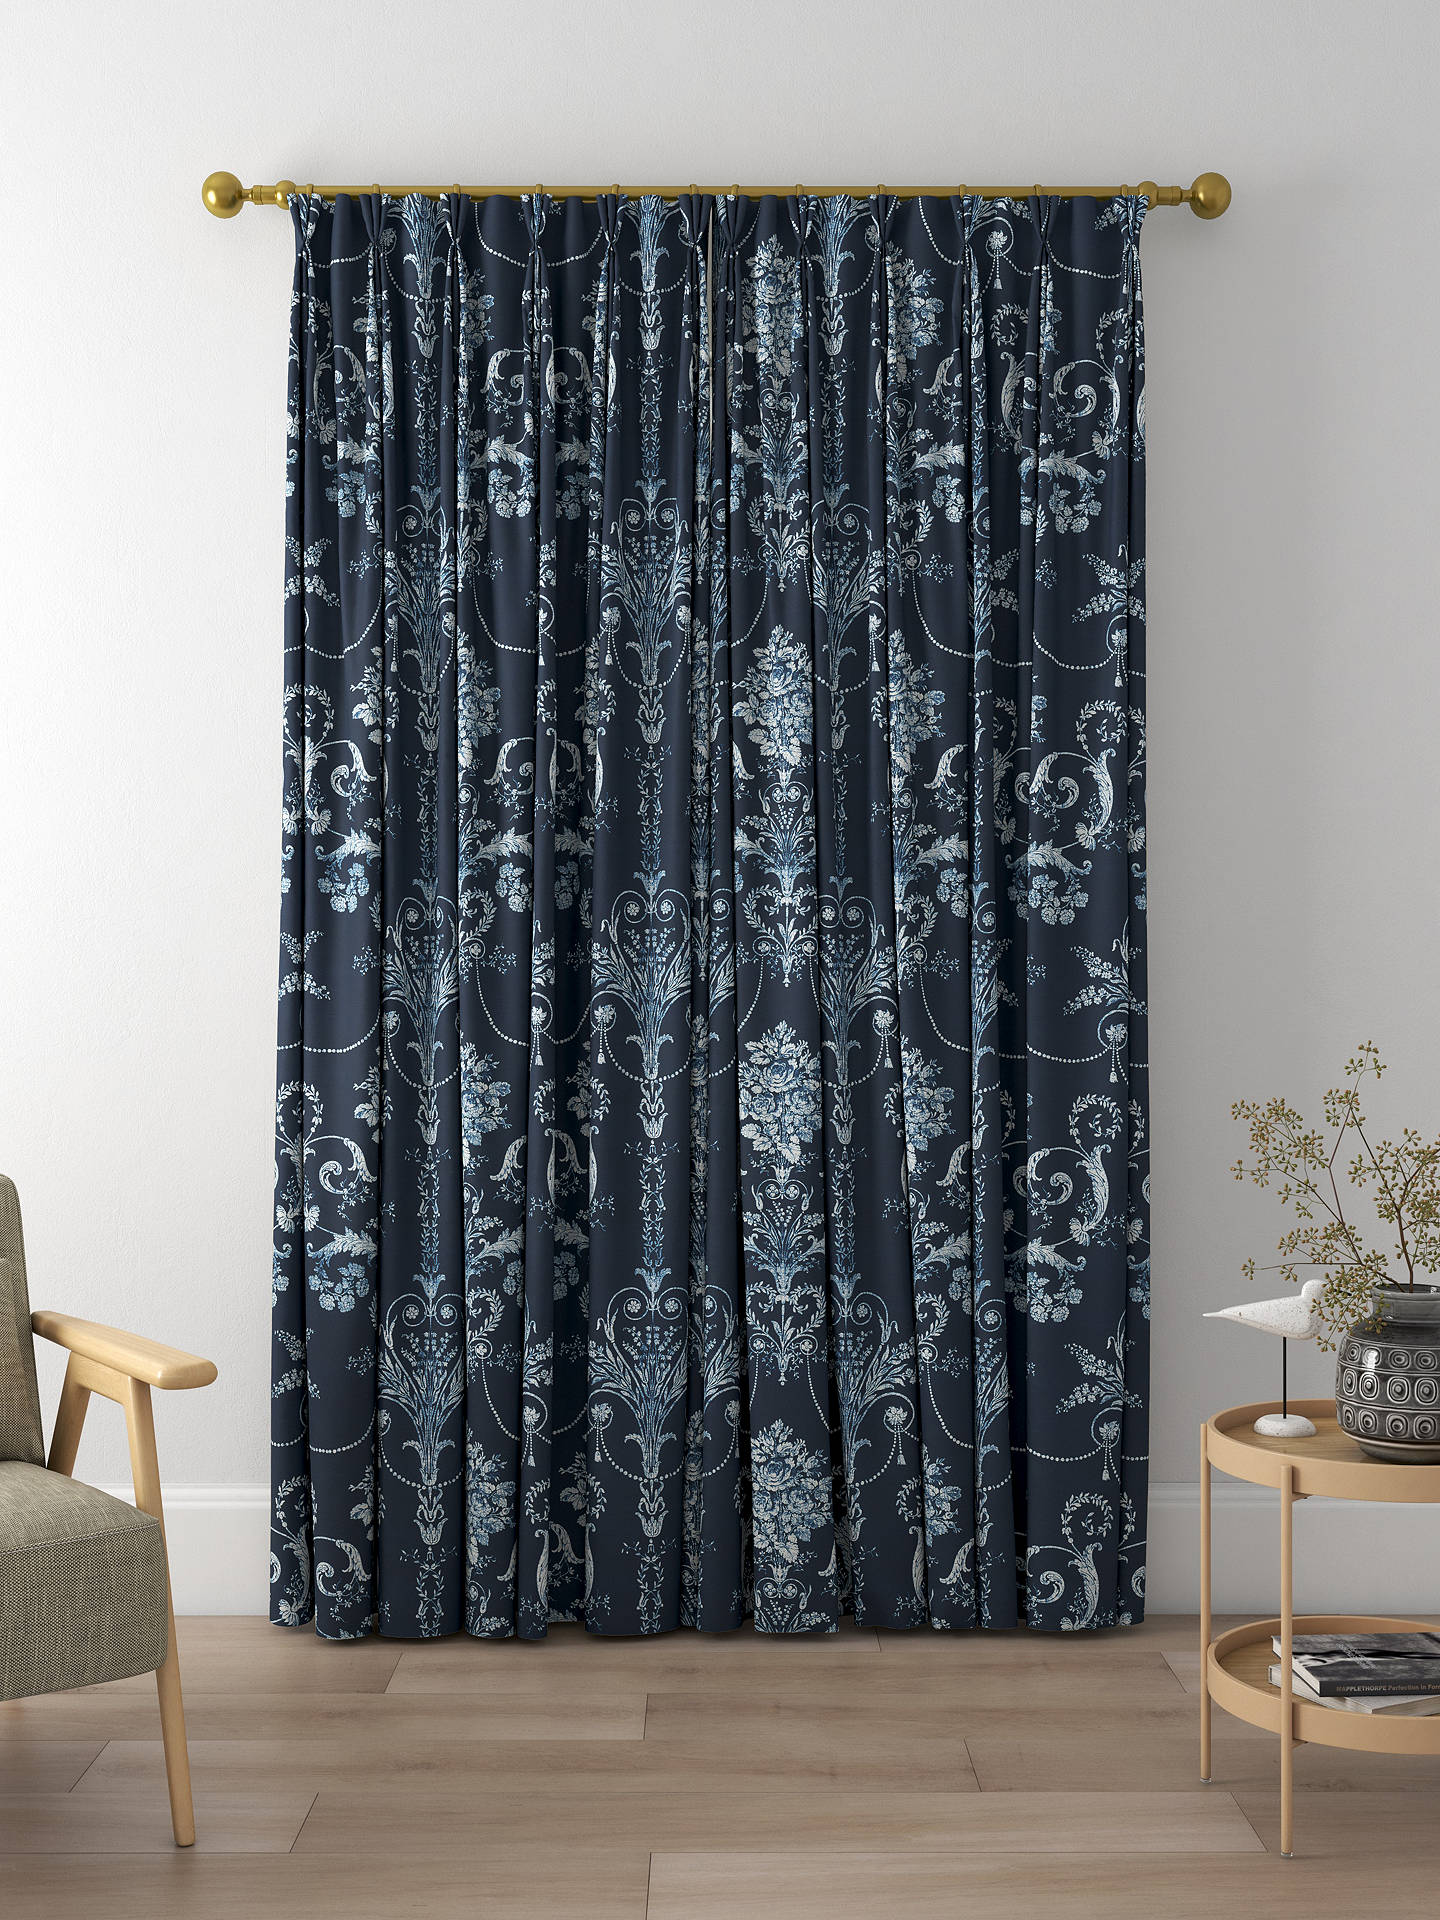 Laura Ashley Josette Made to Measure Curtains, Midnight